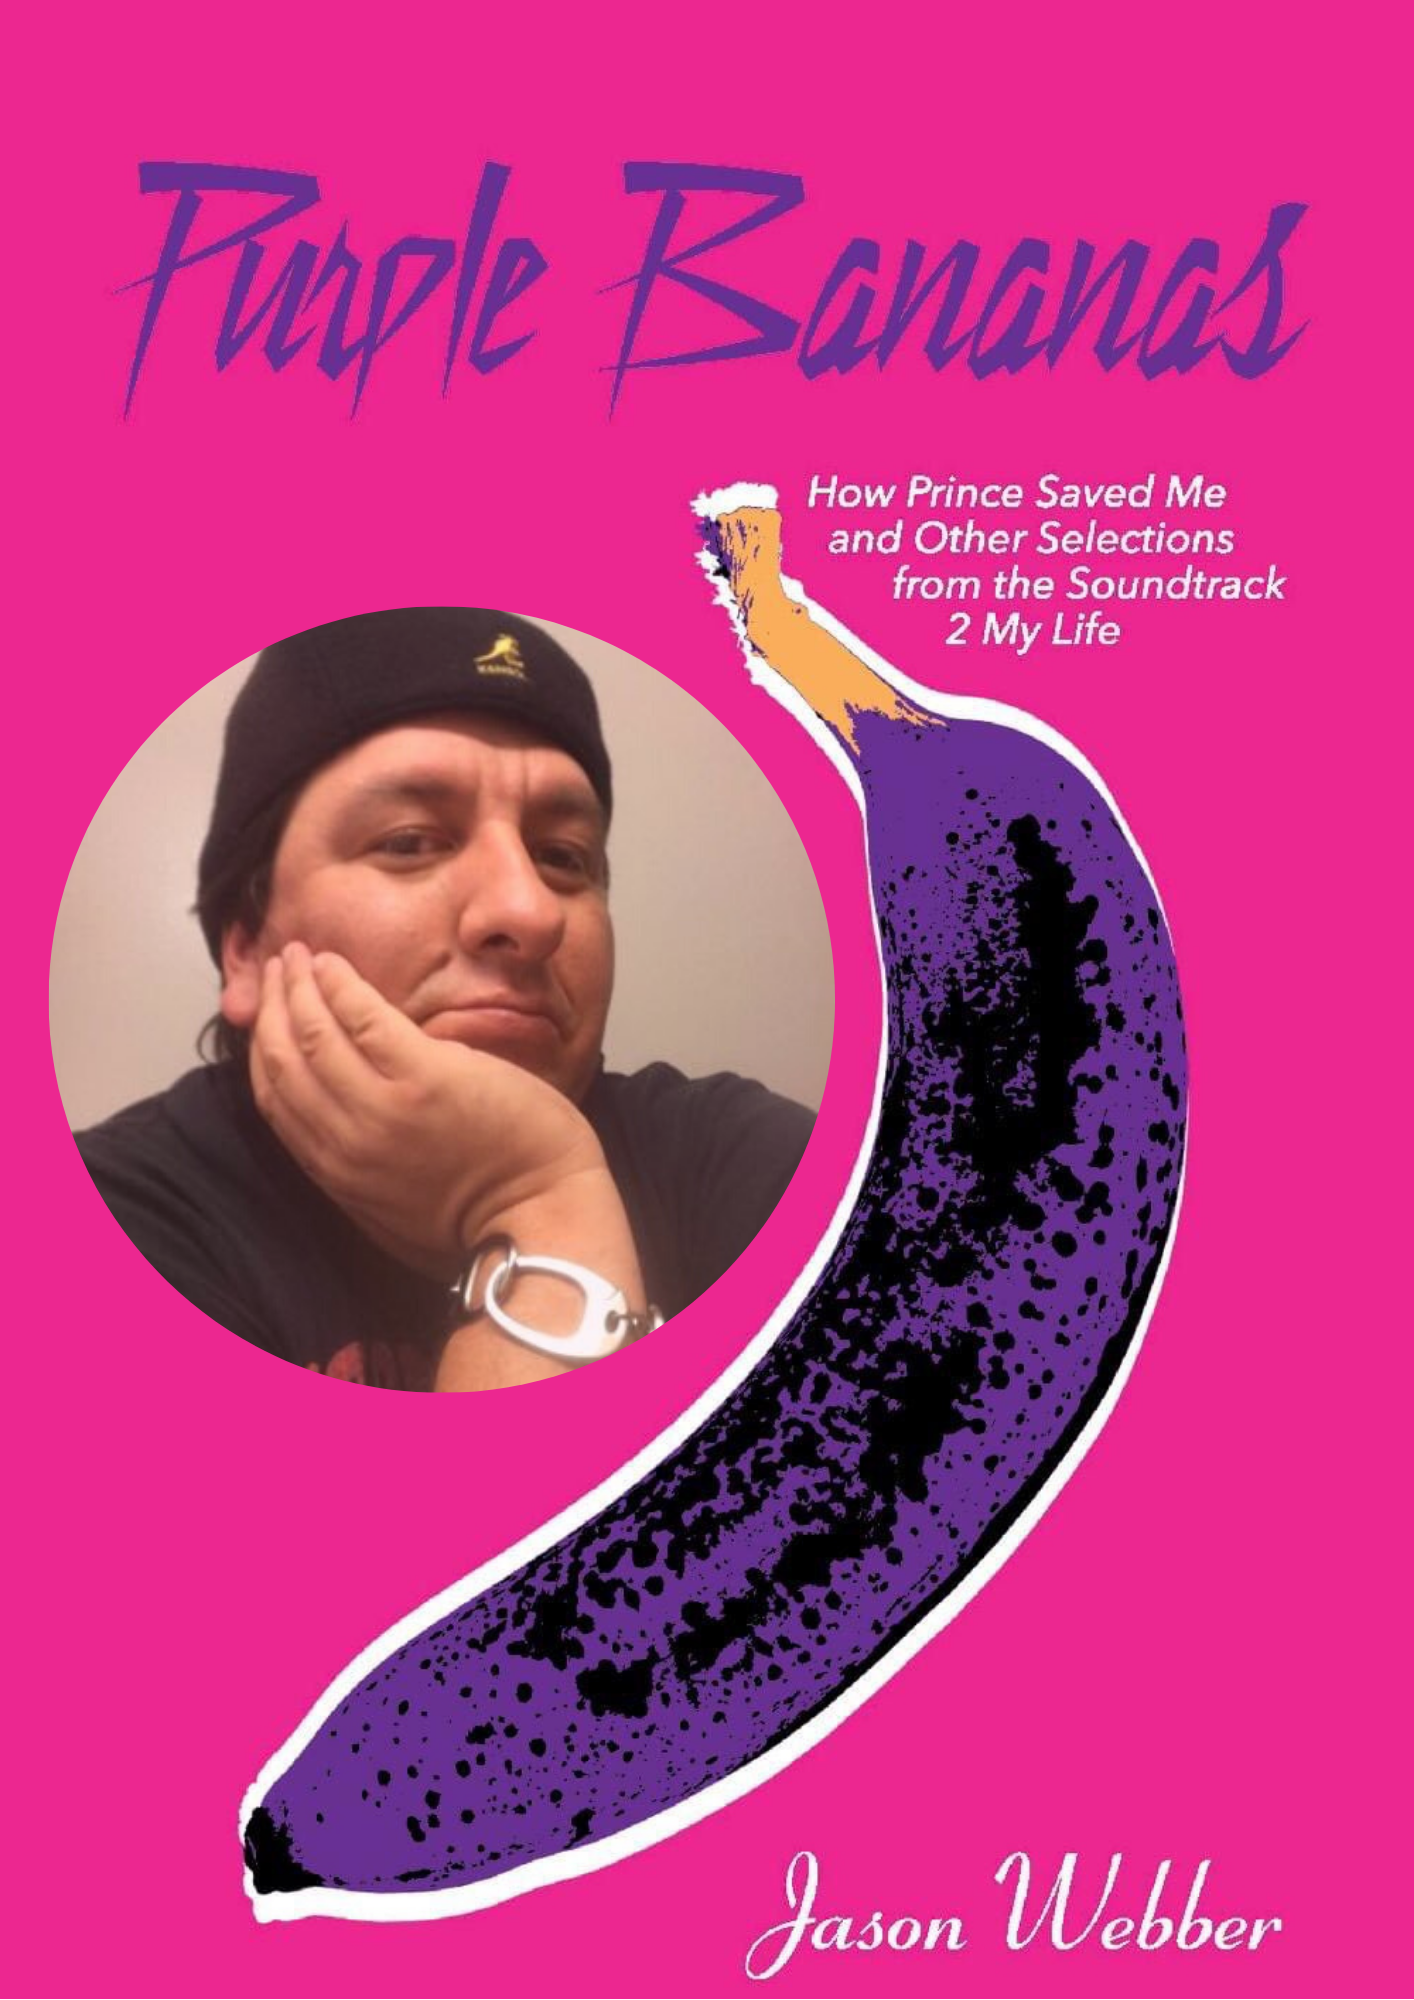 Journalism Alumnus, Jason Webber, publishes his first book, a memoir. "Purple Bananas: How Prince Saved Me and Other Selections from the Soundtrack 2 My Life" .